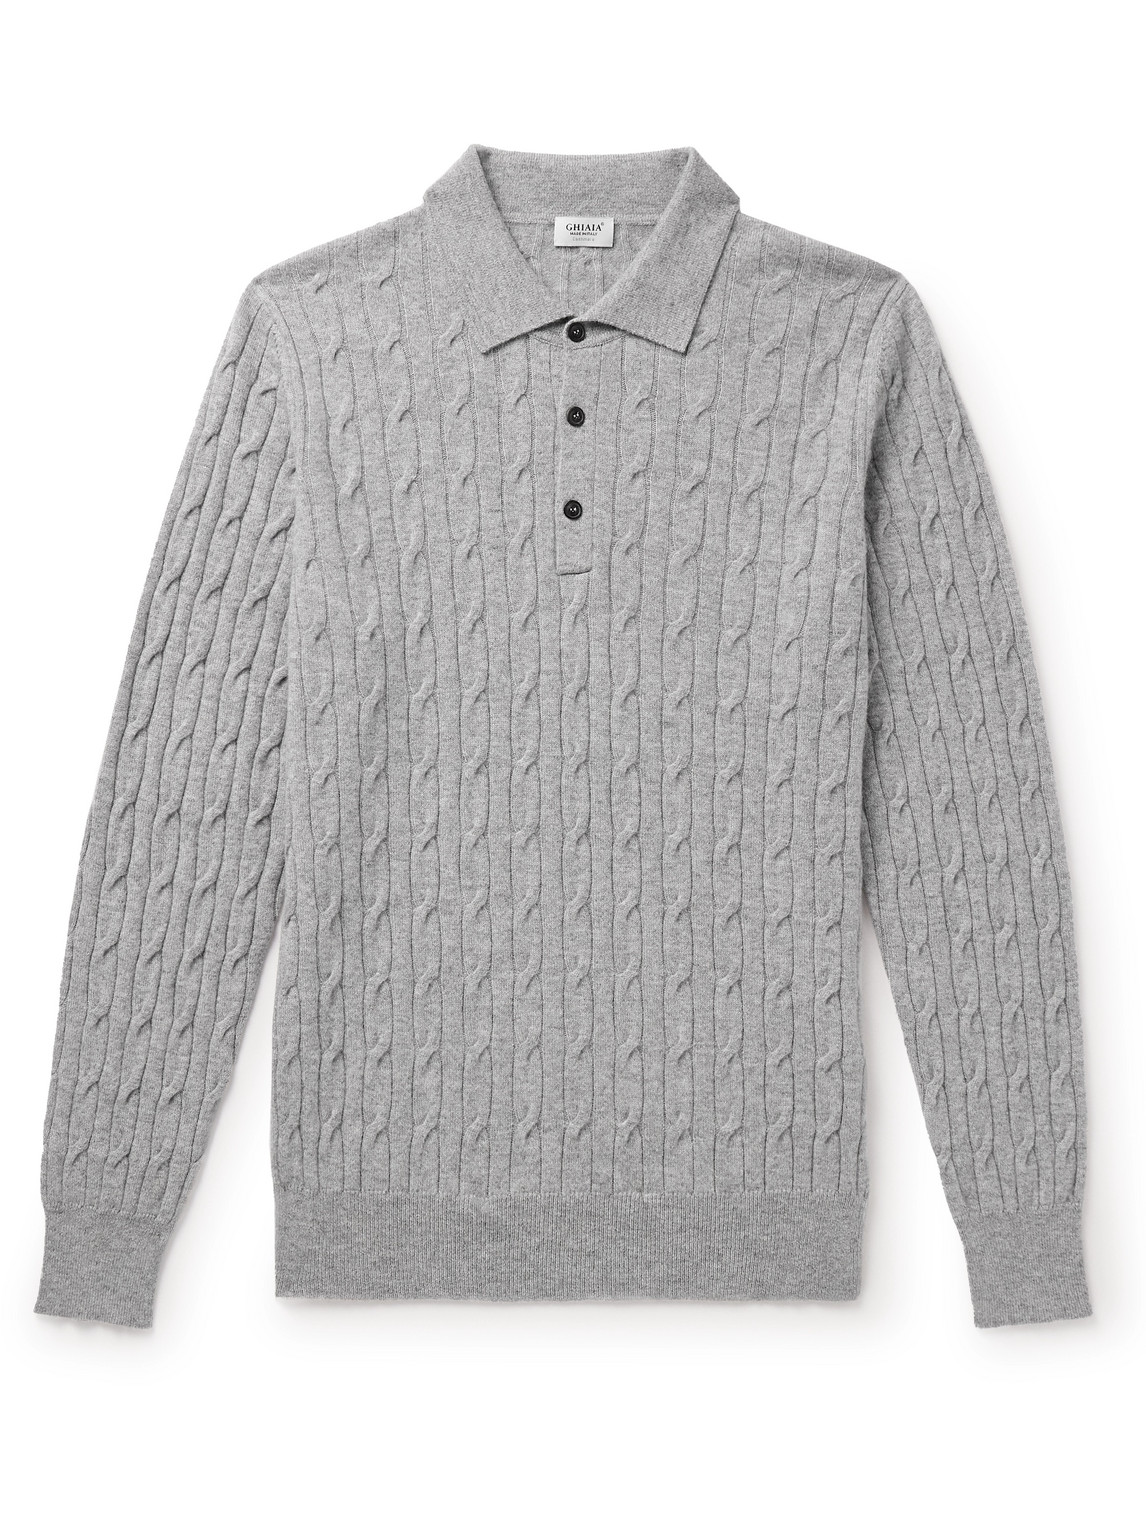 Ghiaia Cashmere Cable-knit Cashmere Polo Shirt In Gray